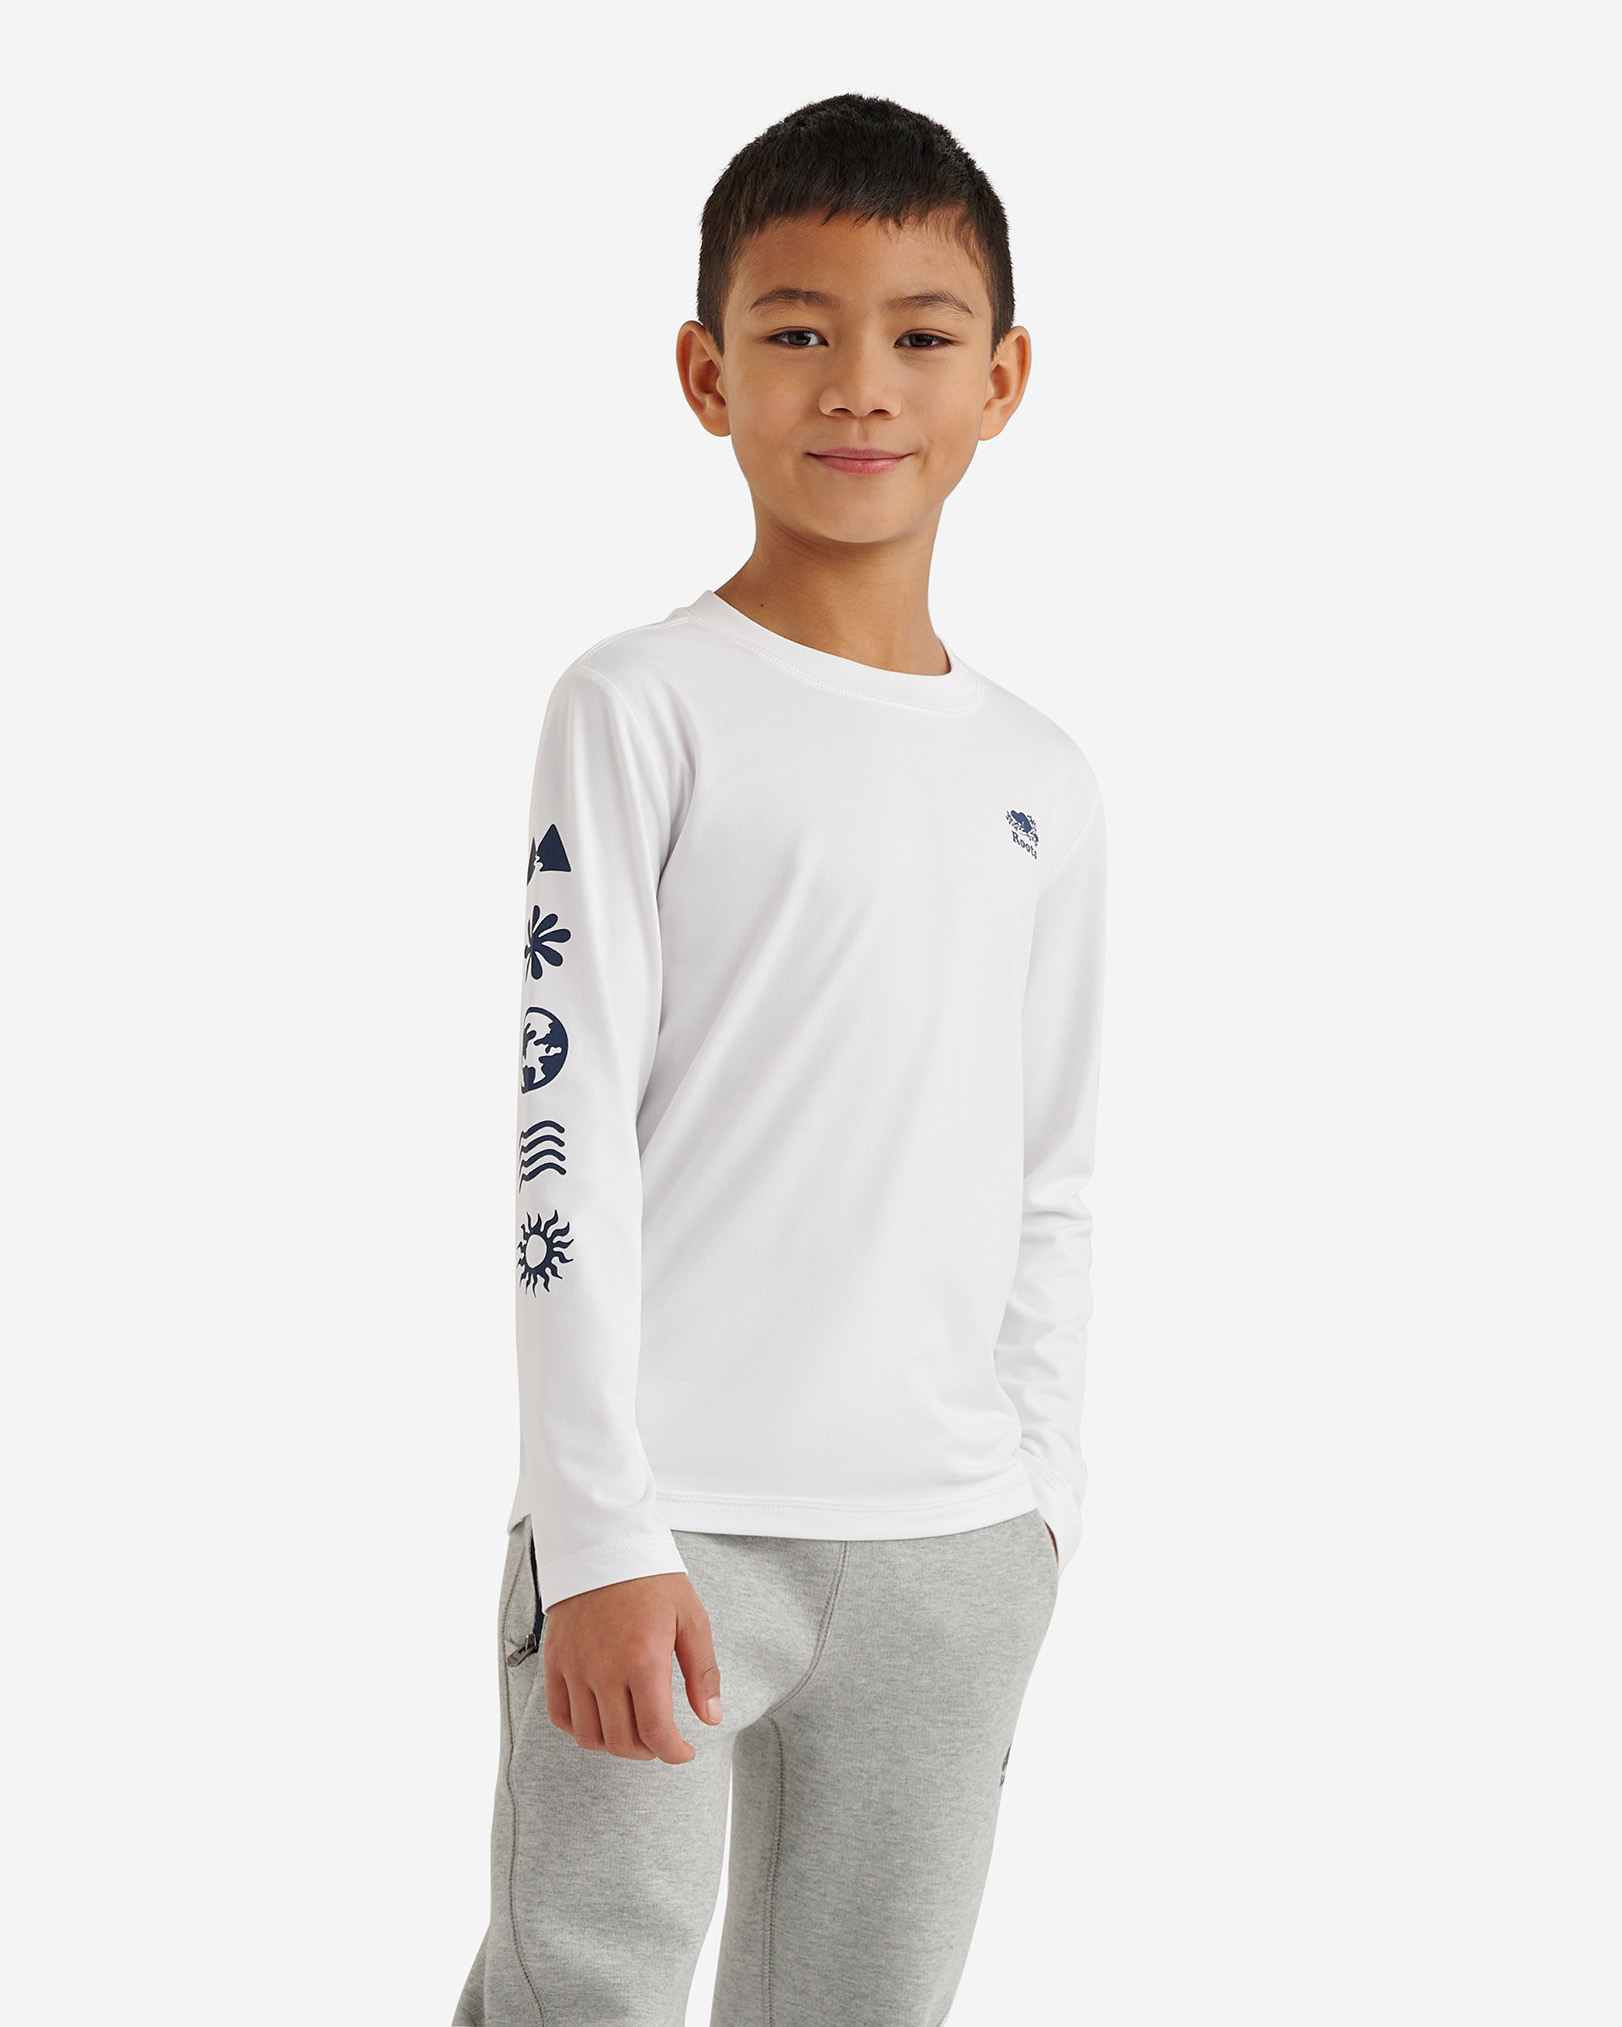 Roots Kids Active Symbols T-Shirt in White